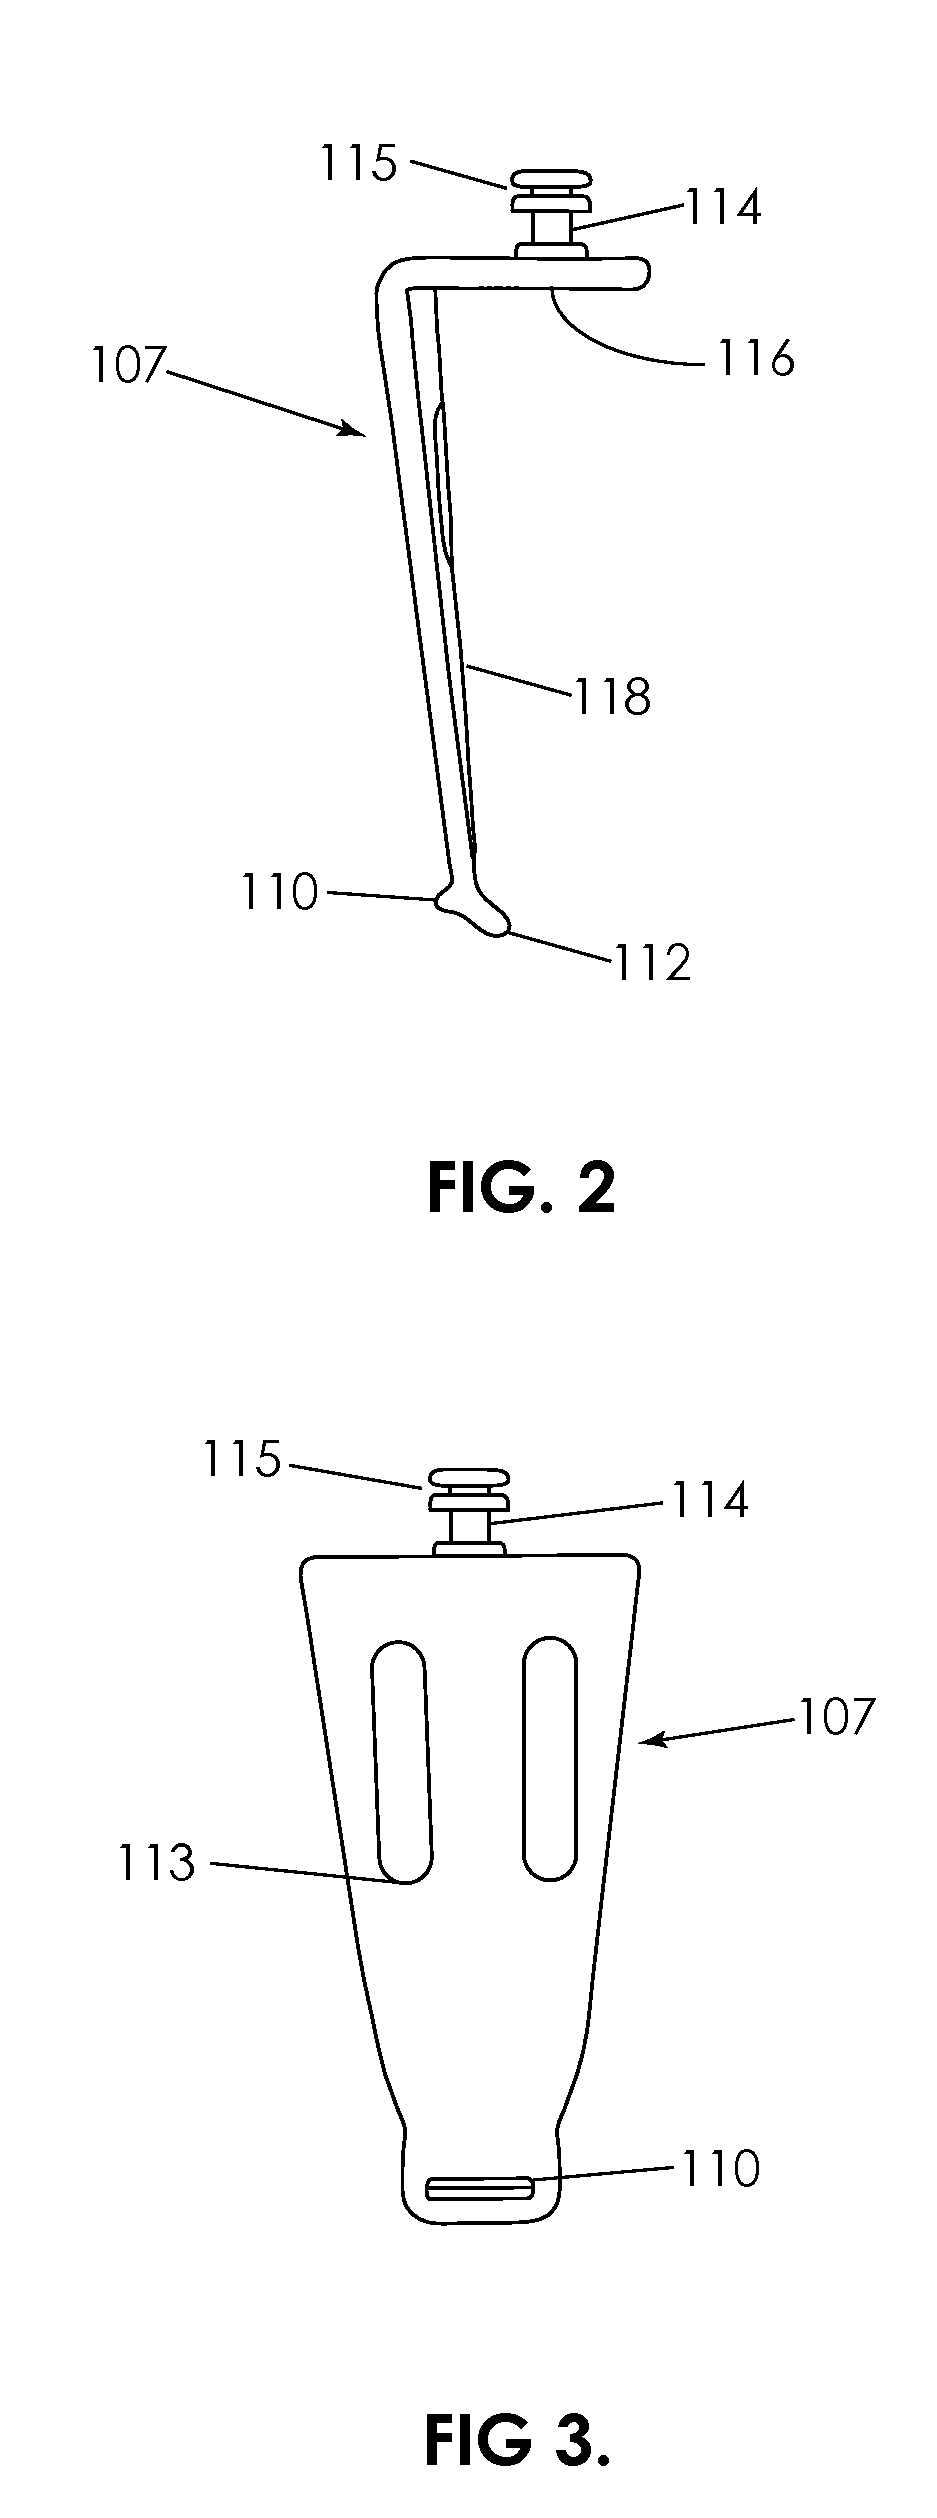 Device and method for tissue retraction in spinal surgery